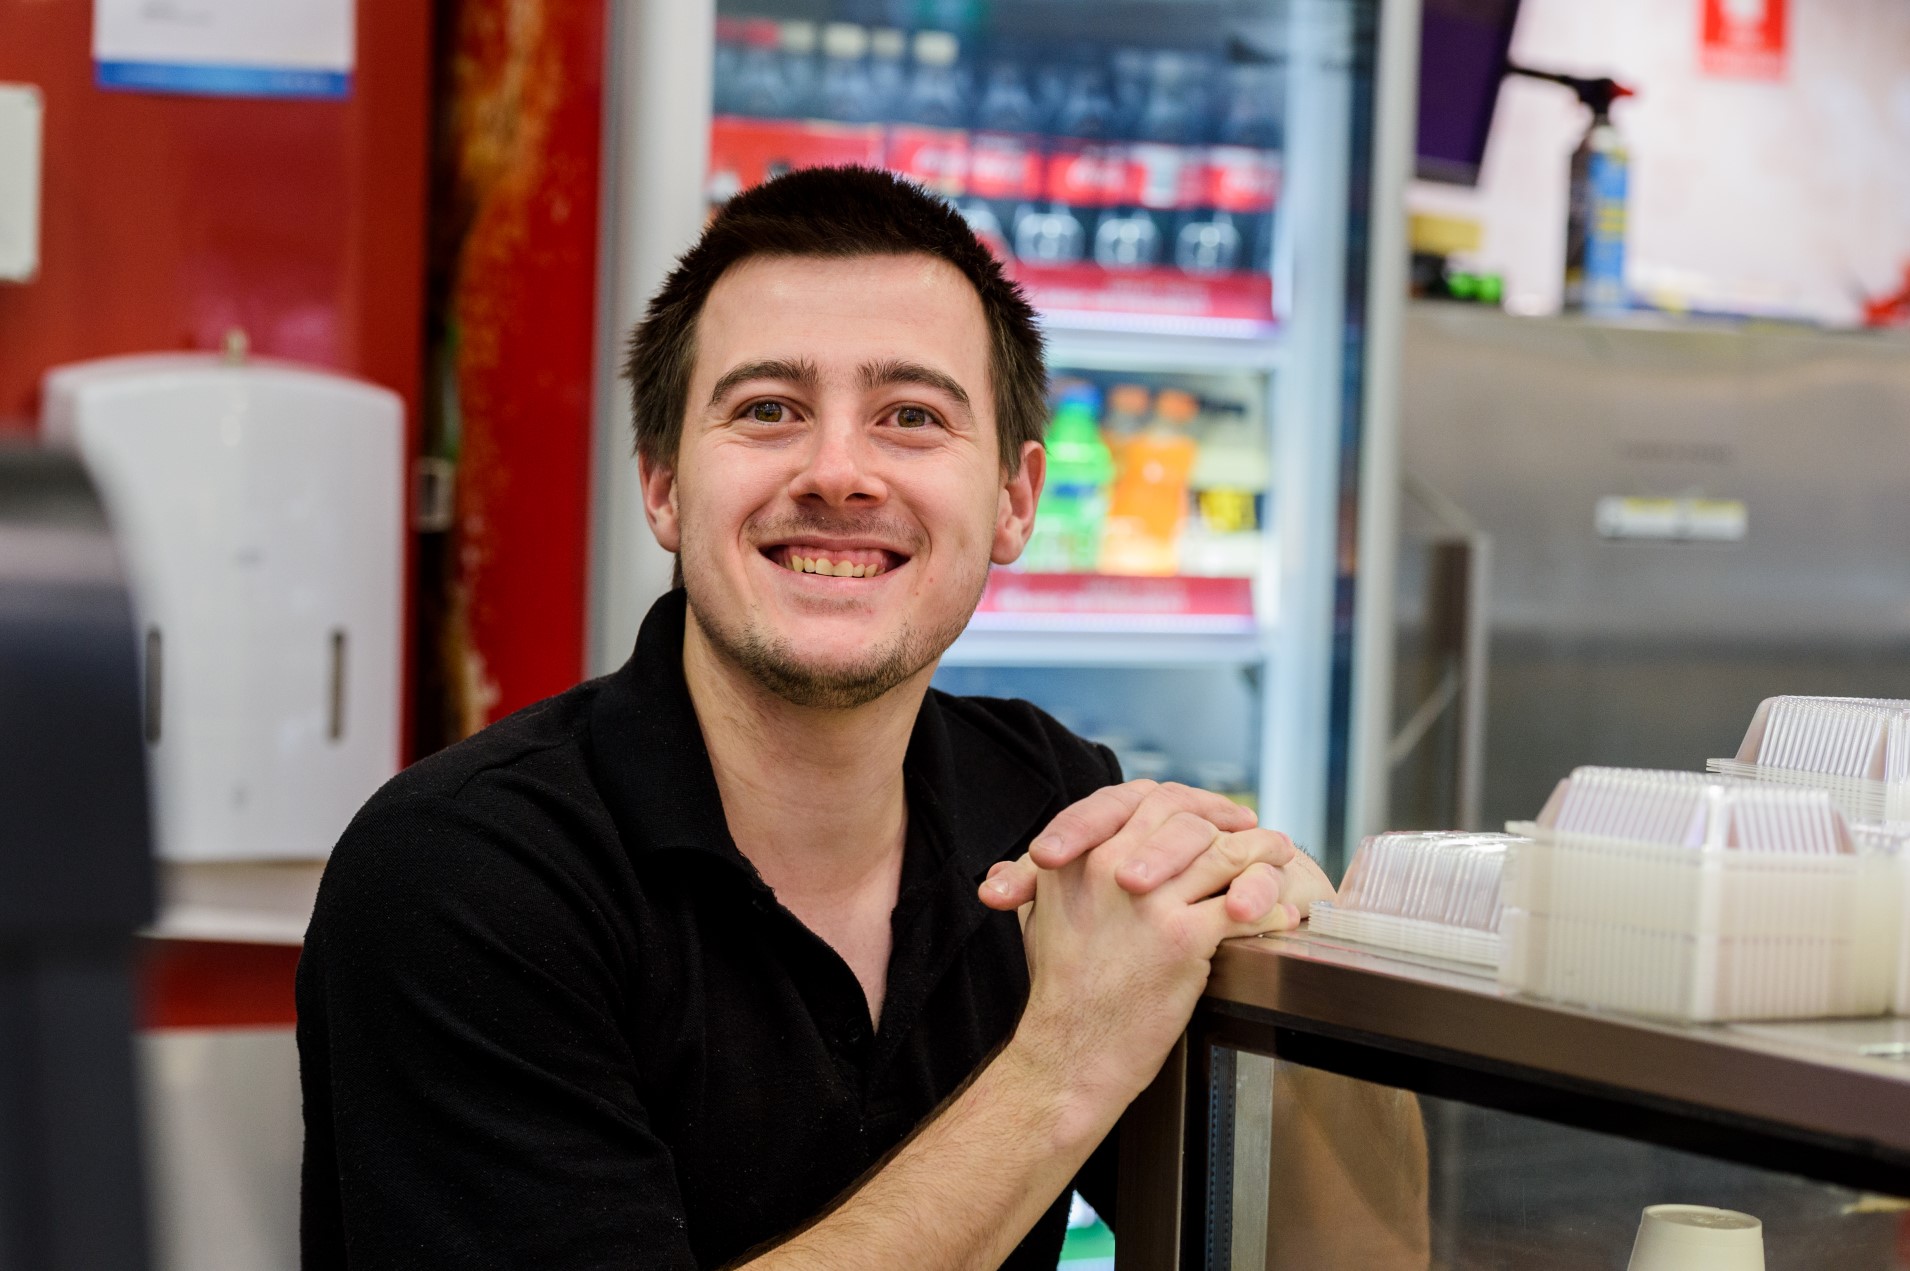 Dale smiles from the counter of his cafe workplace